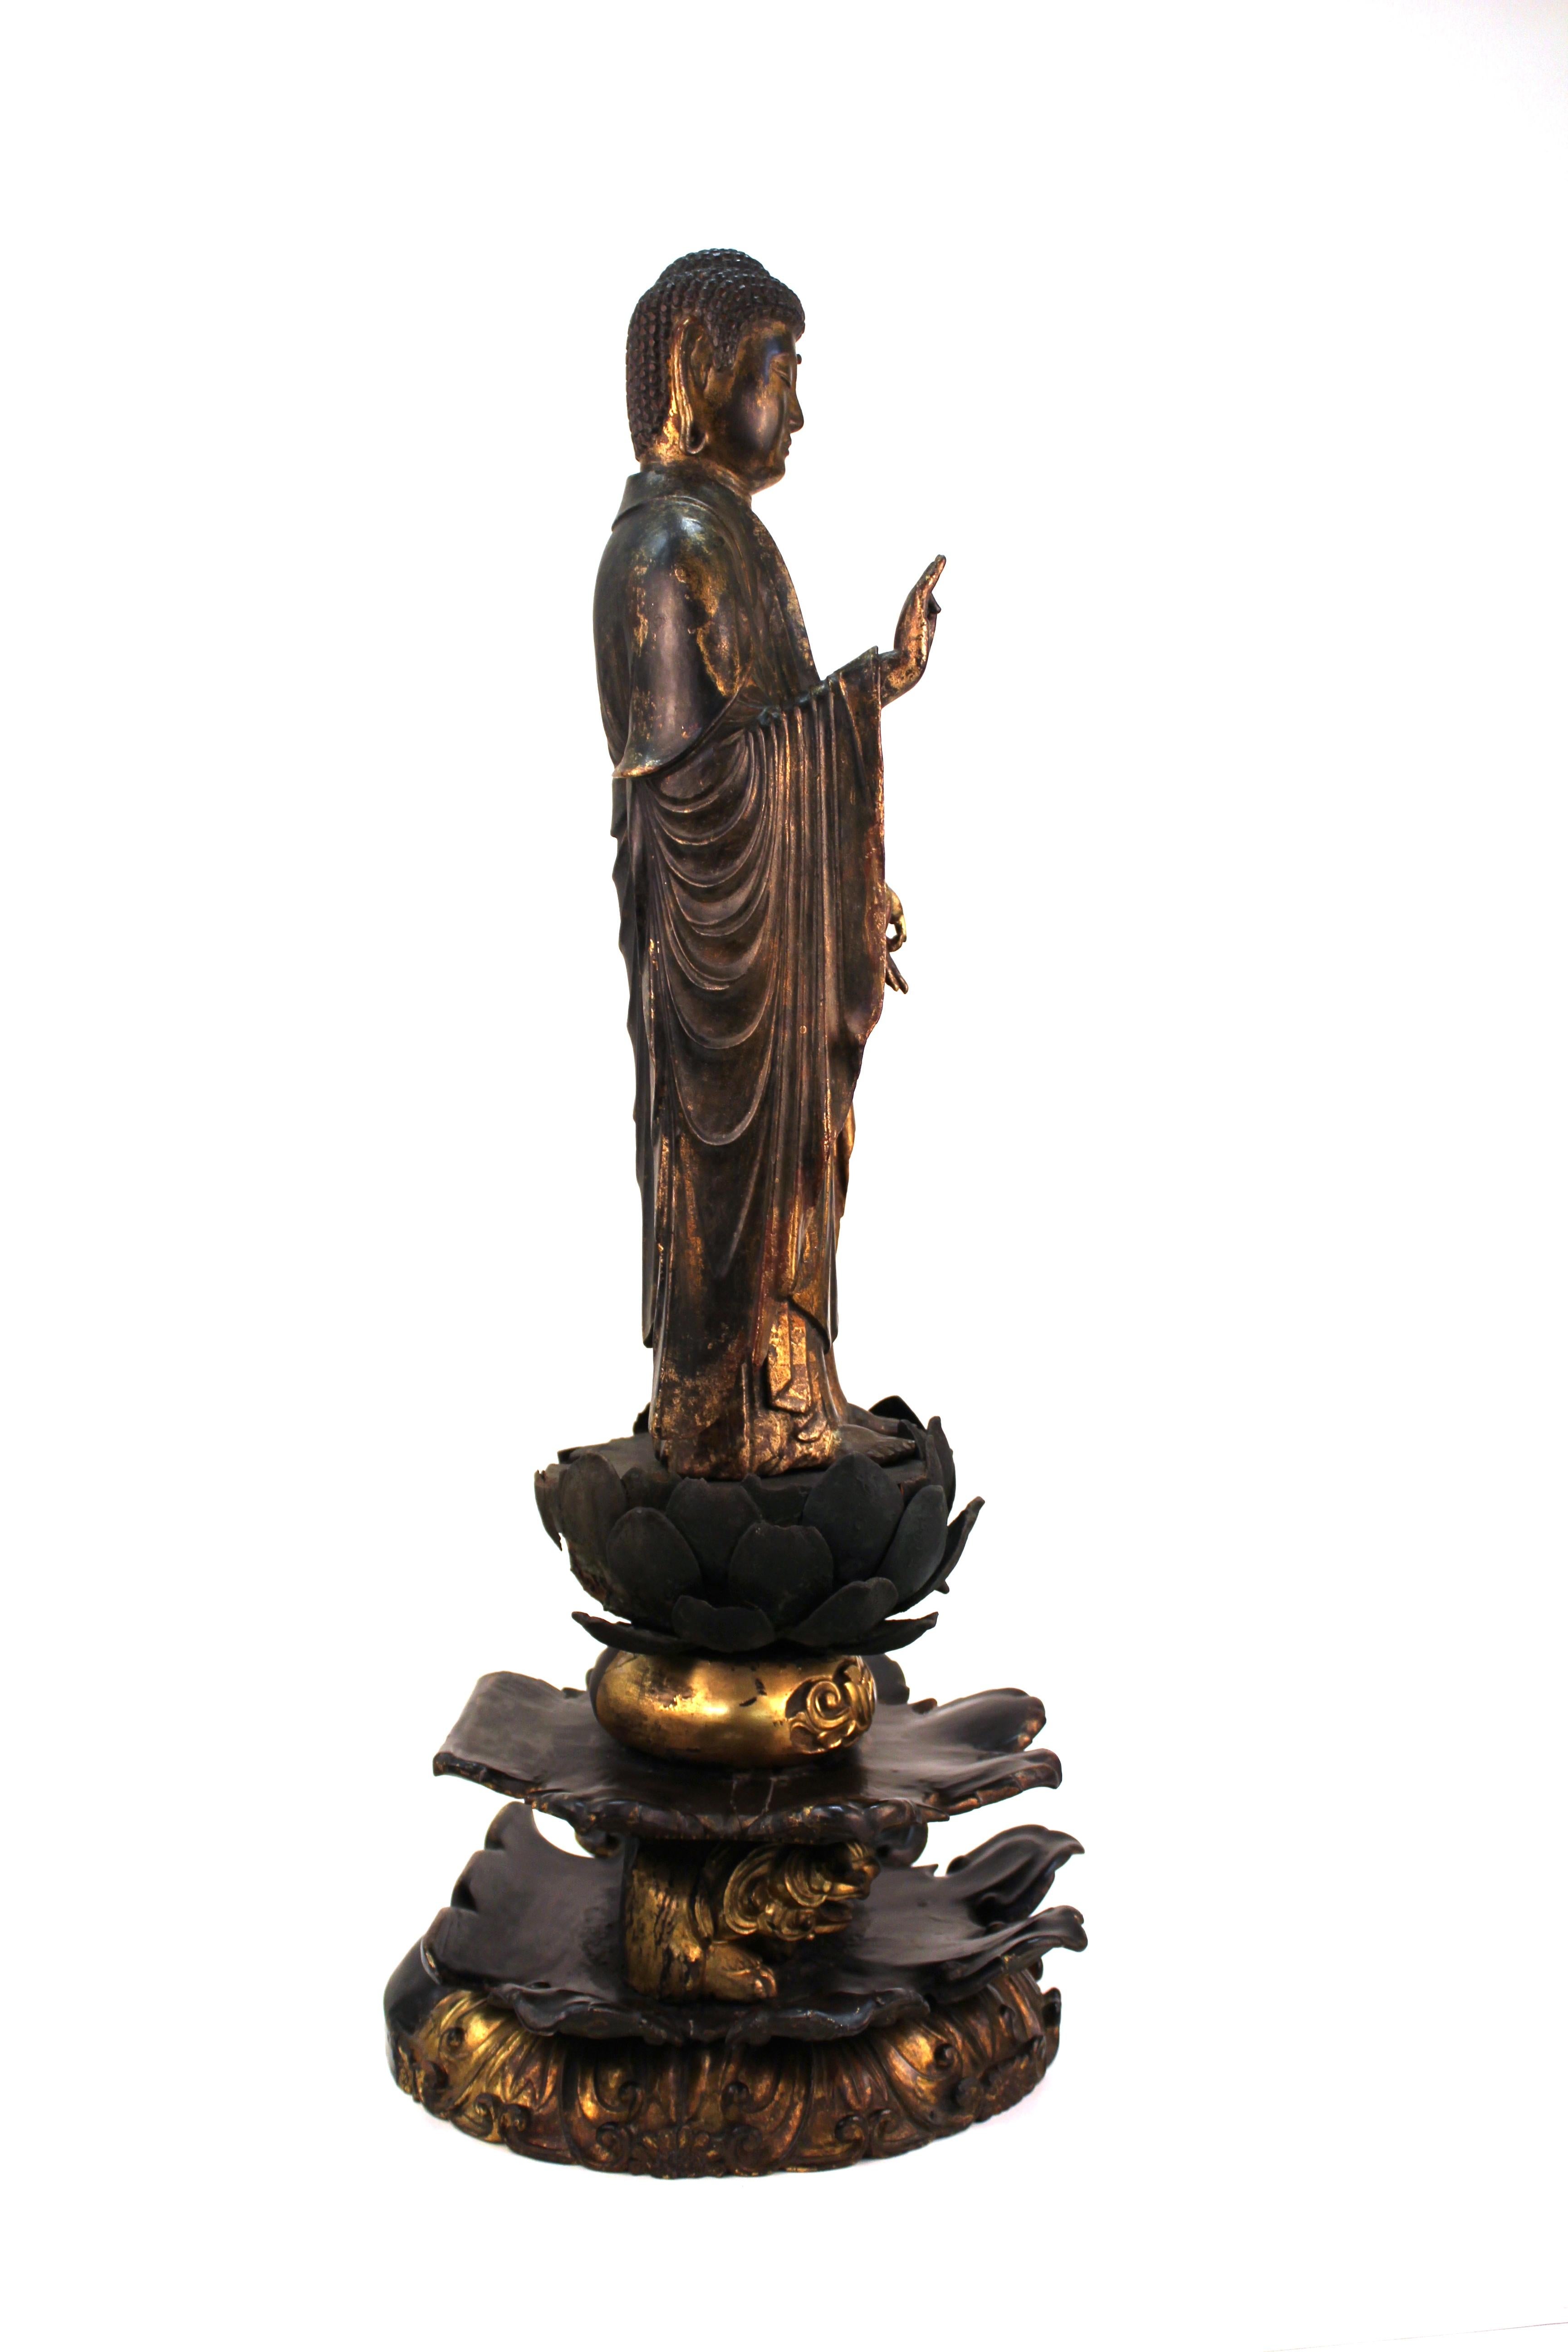 Muromachi Period Japanese Carved and Gilt Wood Buddha Figure Amida Nyorai In Good Condition For Sale In New York, NY